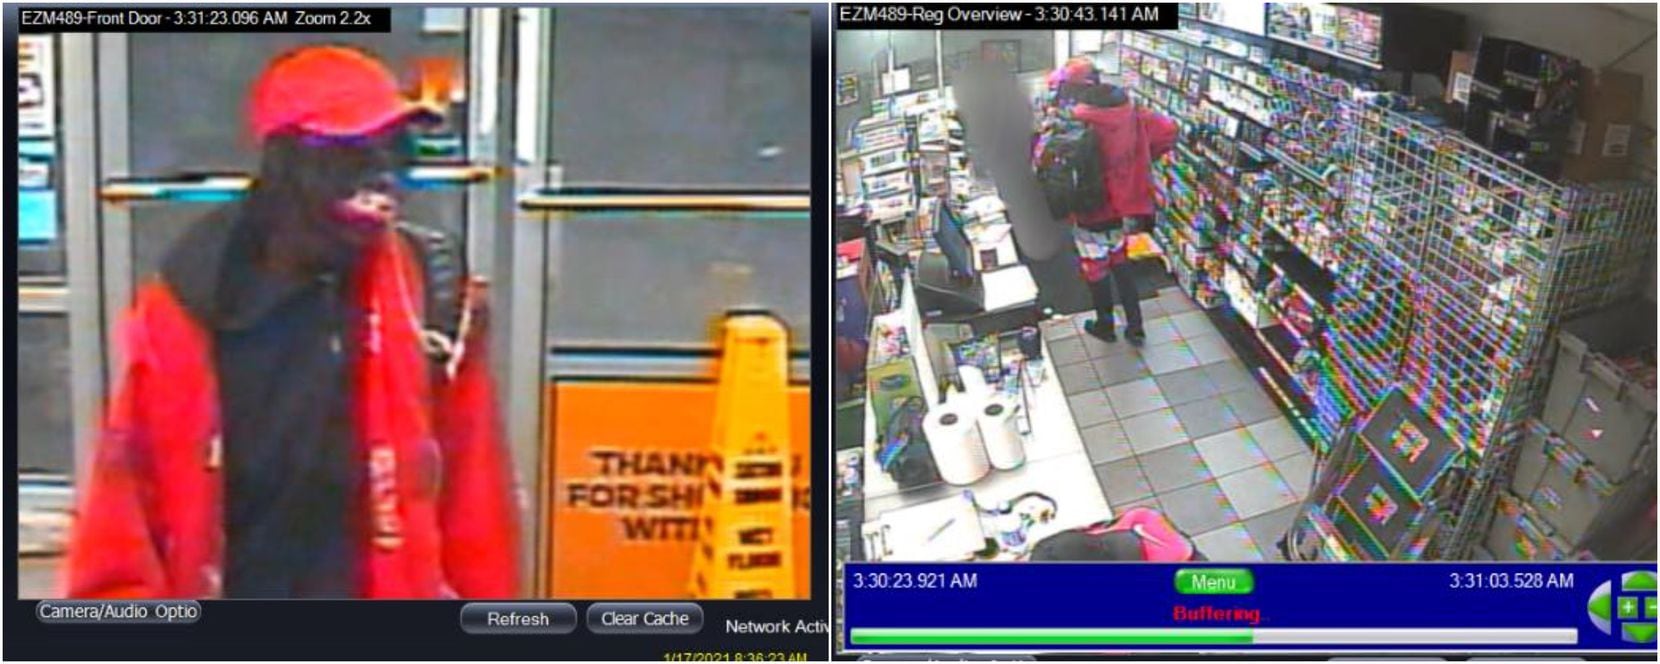 Police released images from surveillance footage of the fatal shooting of a store clerk early Sunday in Arlington.